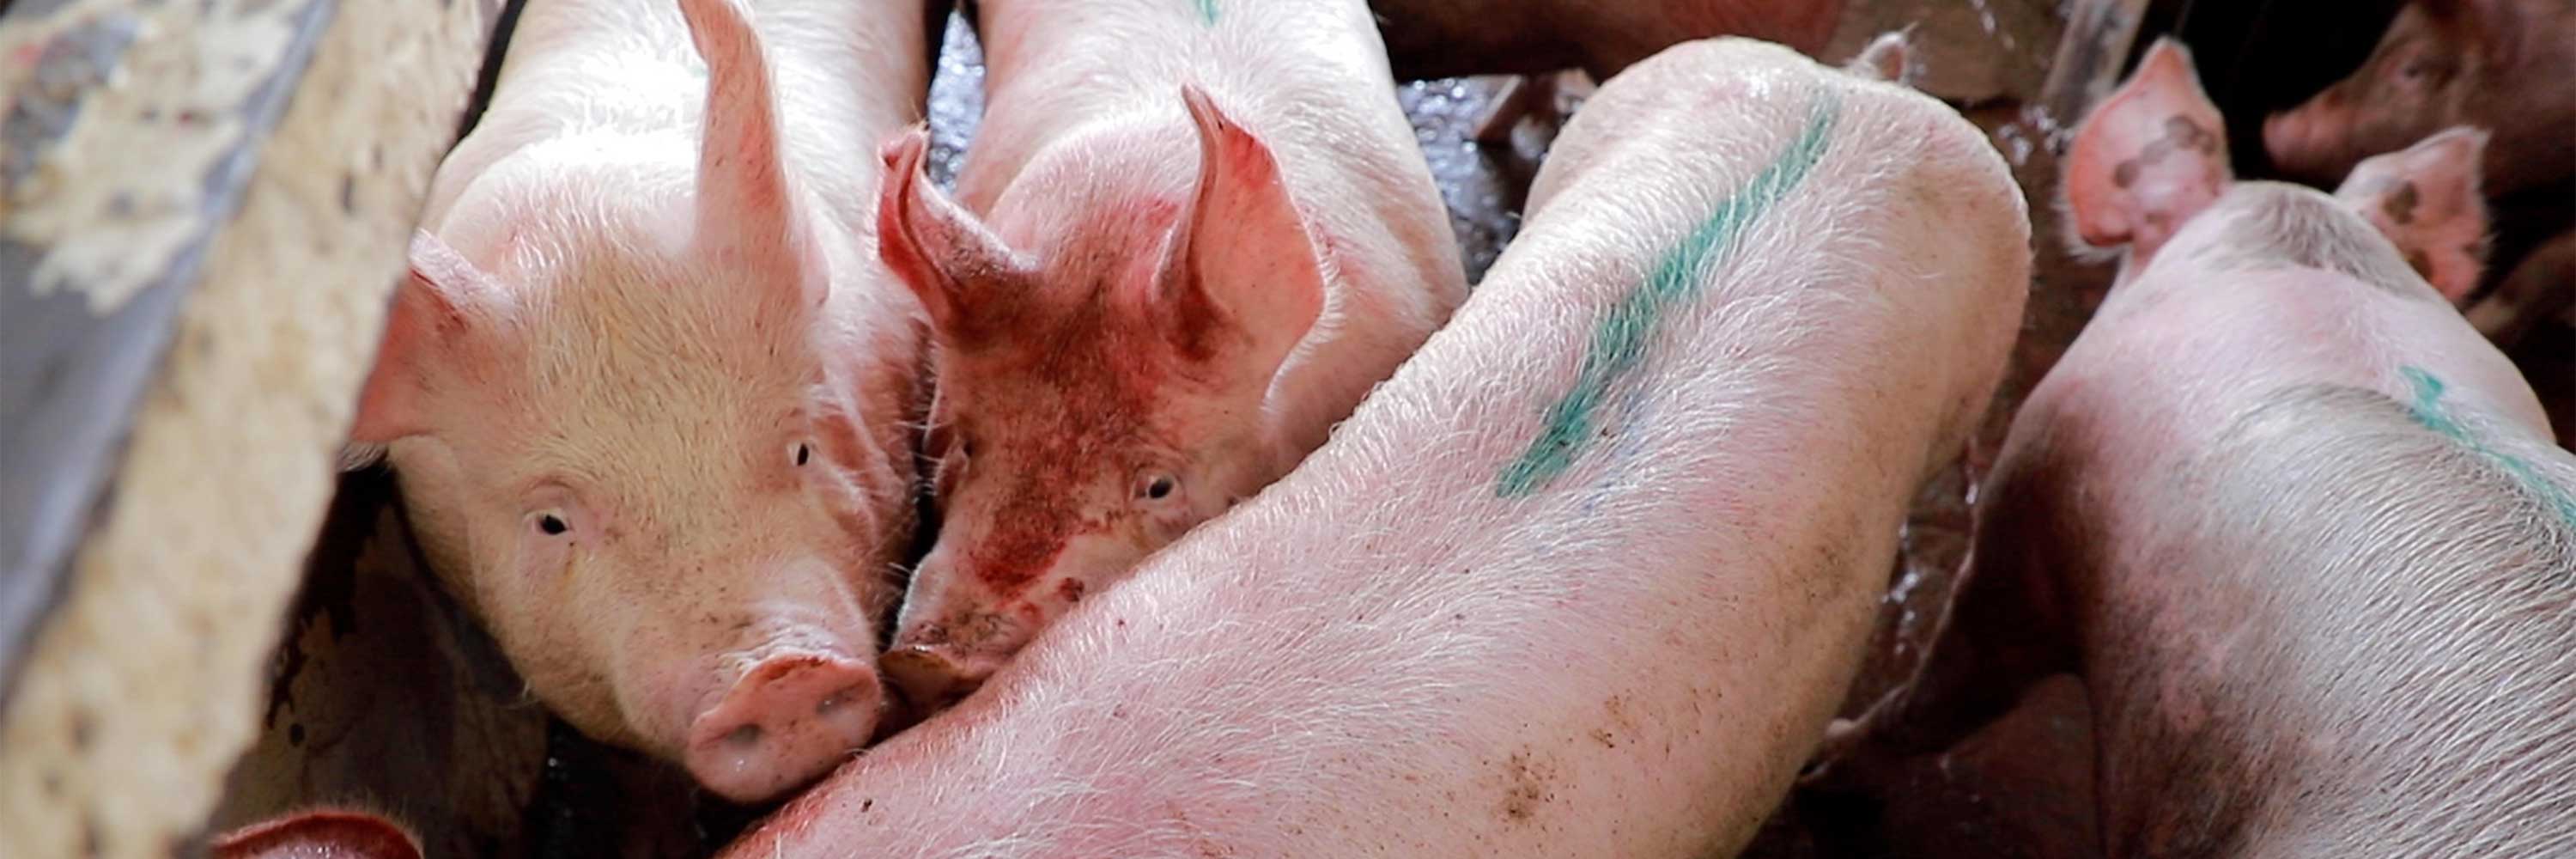 Pig covered in blood in factory farm